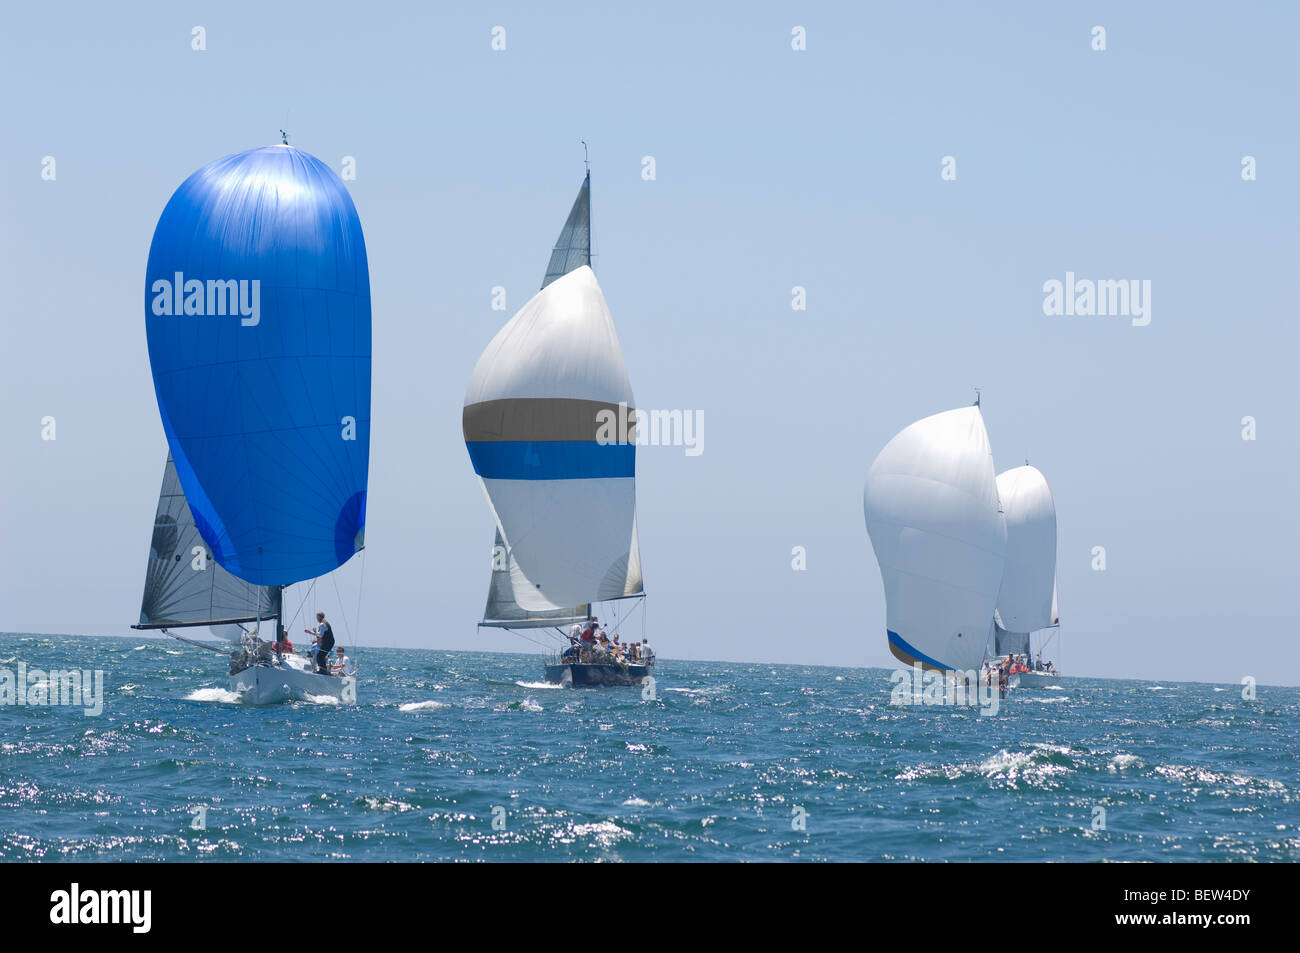 Yachts compete in team sailing event, California Stock Photo